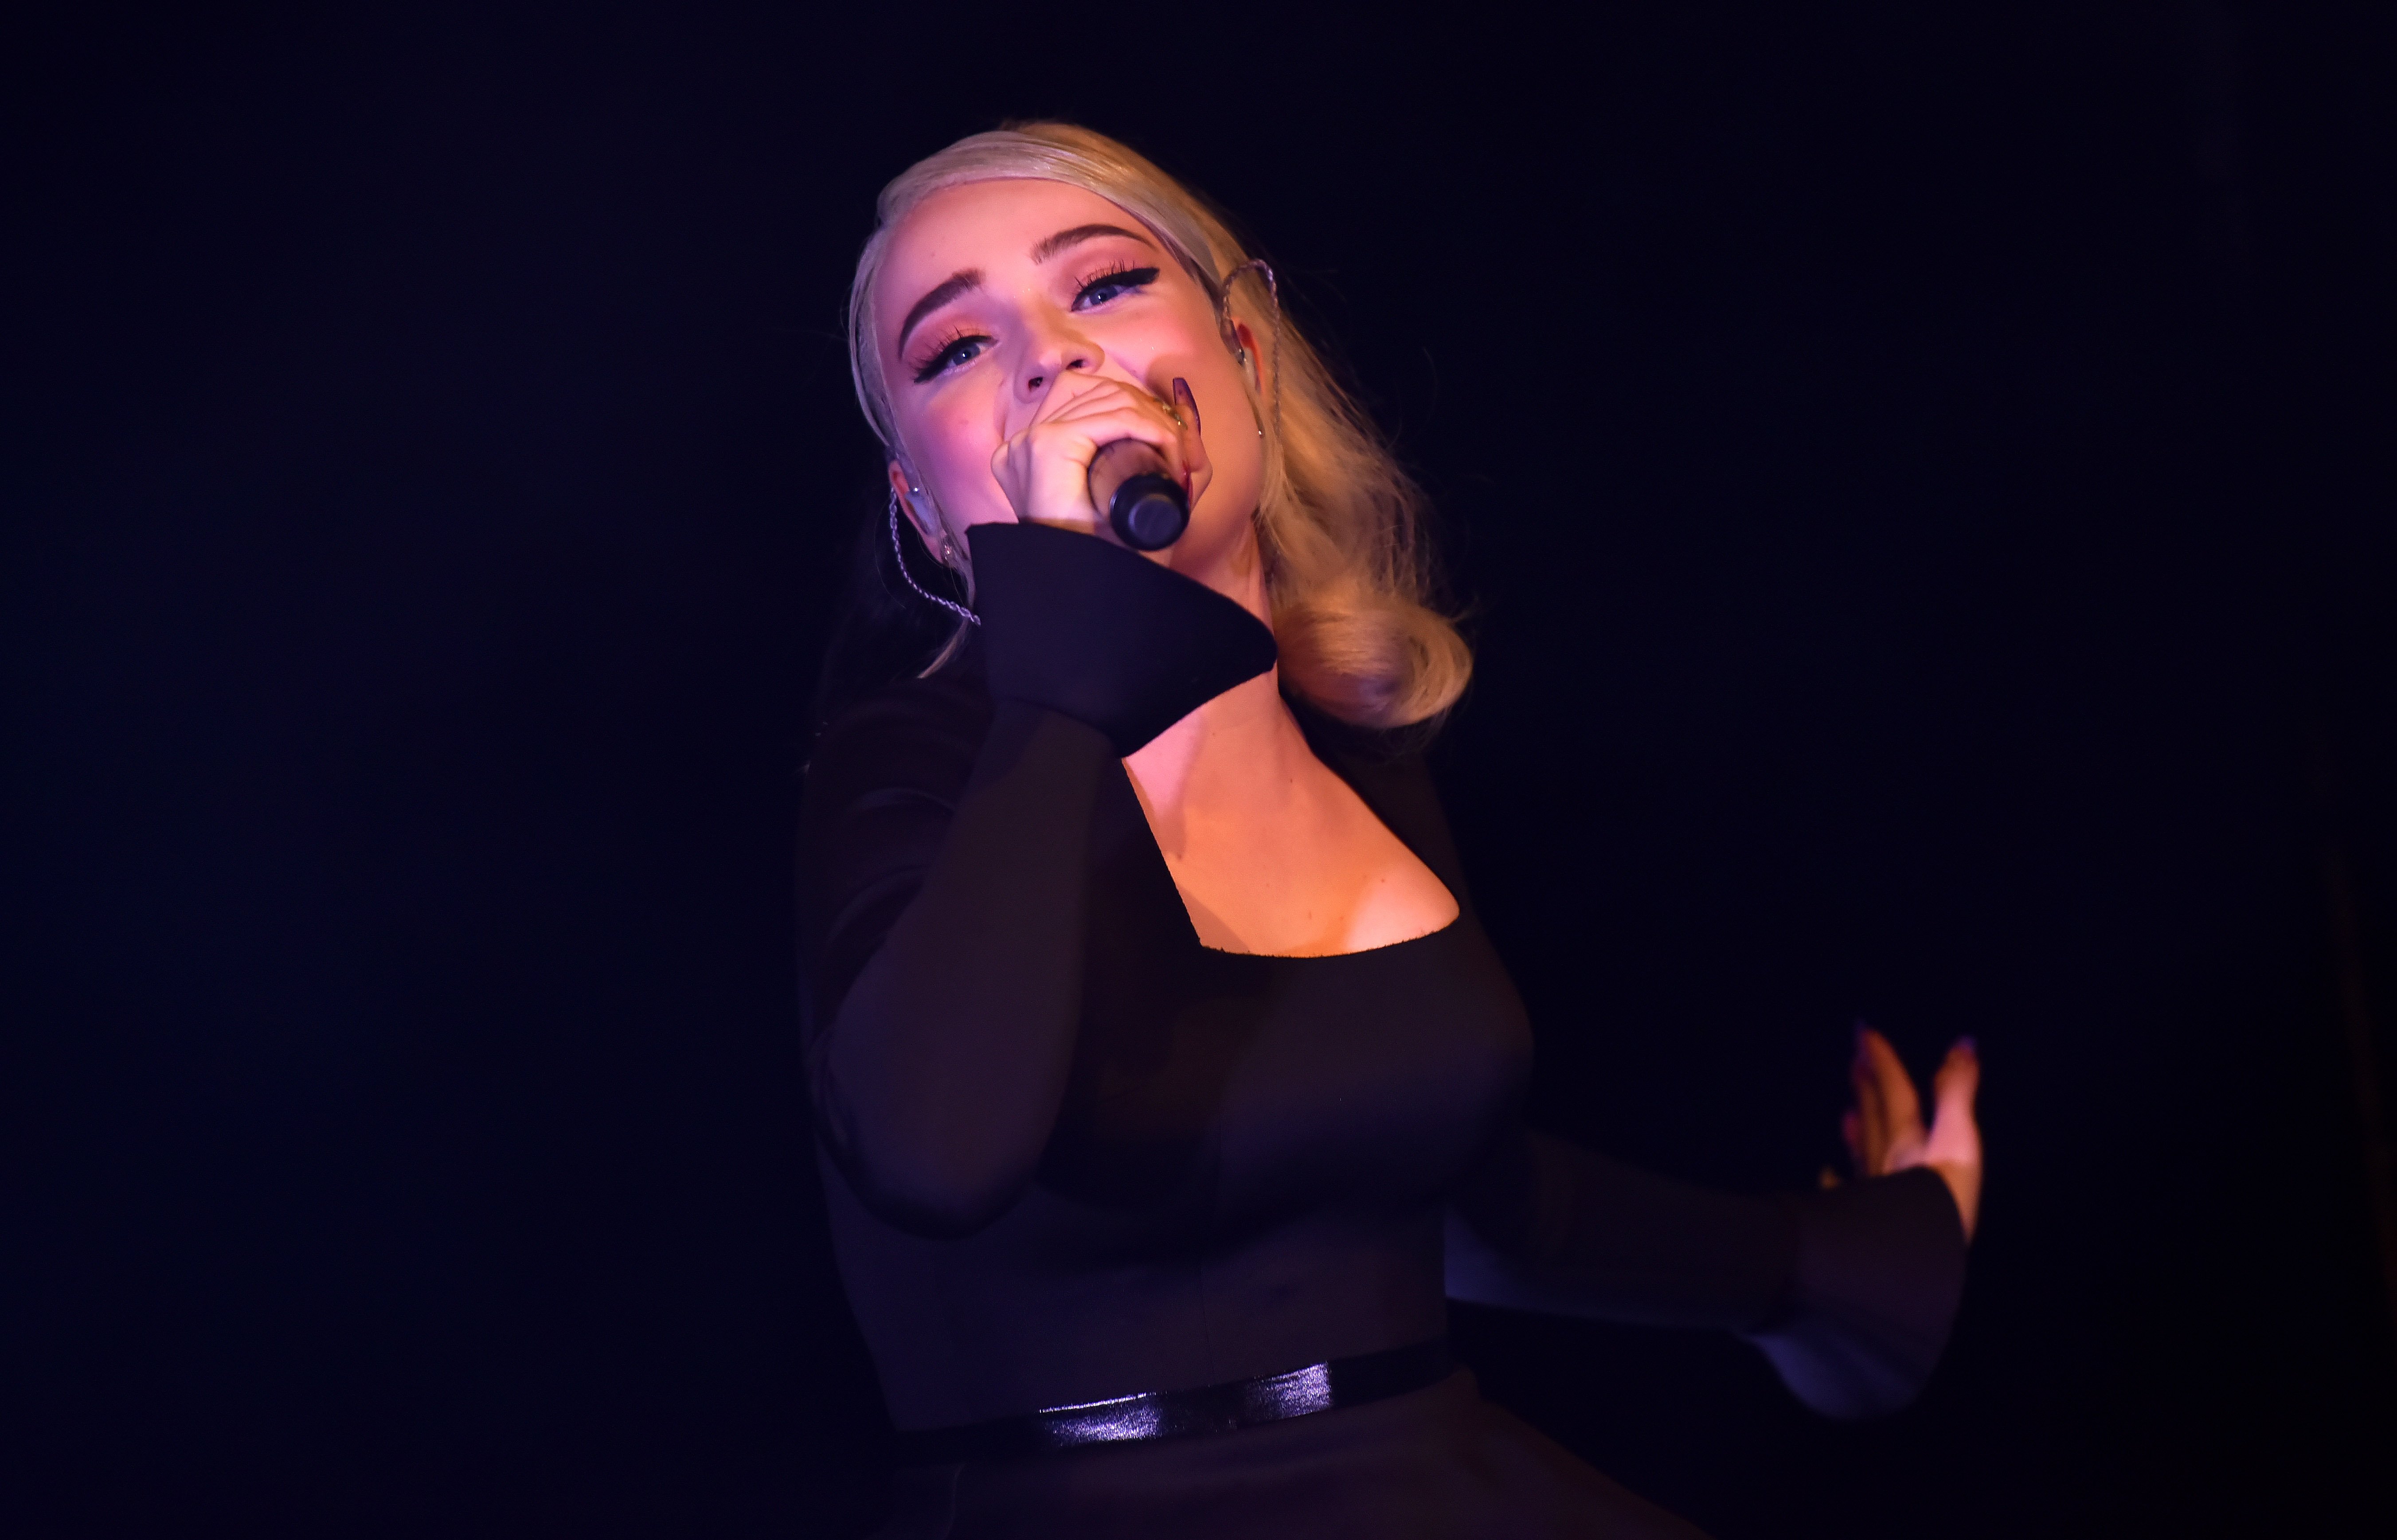 Kim Petras performs on stage at the O2 Shepherd's Bush Empire